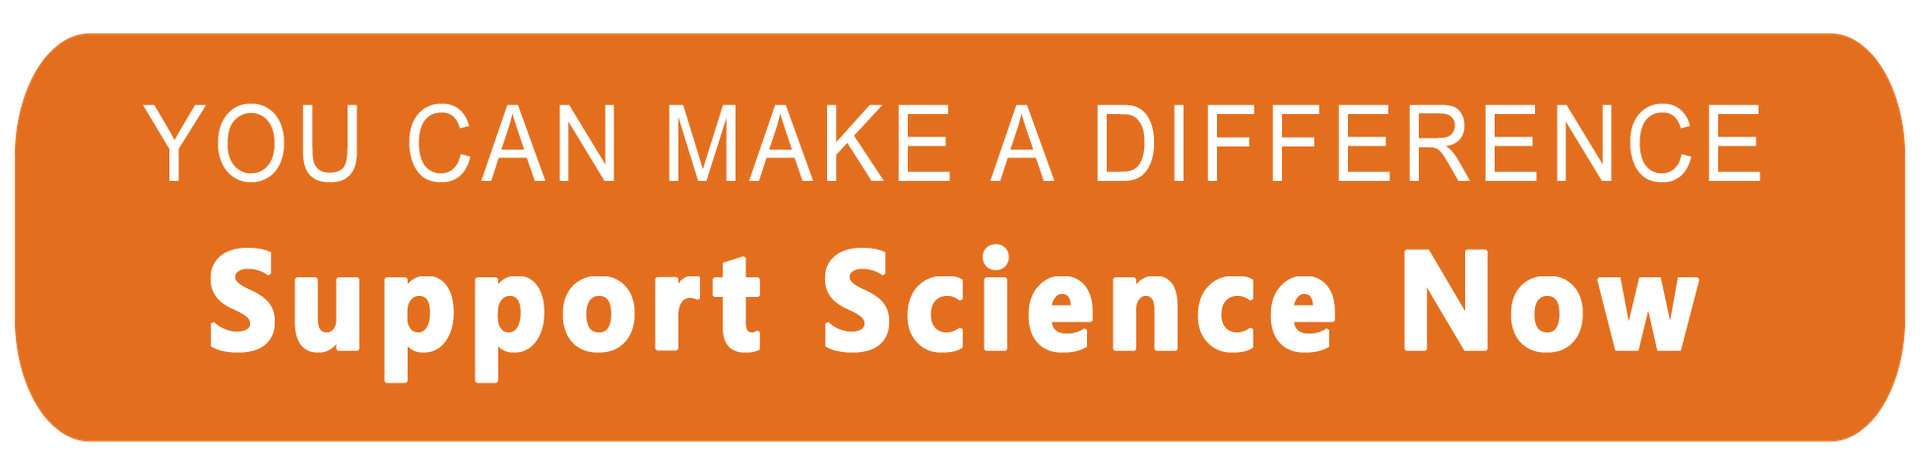 You can make a difference -- Support Science Now